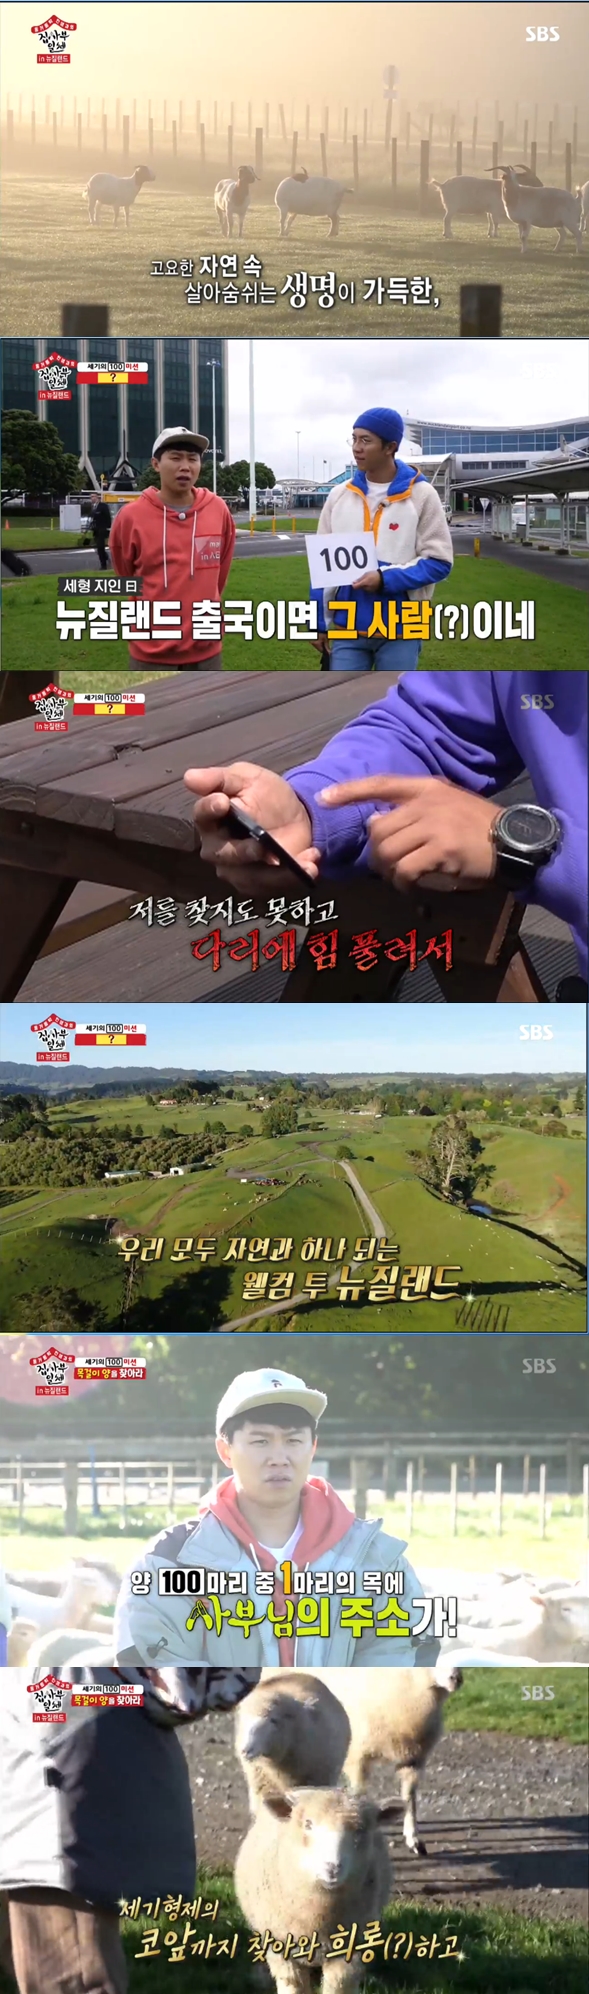 The sheep were a hundred.In the SBS entertainment program All The Butlers broadcasted on the night of the 8th, members who perform the mission presented by the new master in New Zealand where nature and human being coexist beautifully came out.Lee Seung-gi and Yang Se-hyeong, who chose 100 out of the missions given by Master in Korea last week, crossed the Mother Nature where animals ran in carts.The two of them laughed at each animal they saw, including the upbringing material, Lee Sang-yoon, and Shin Sung-rok.The mission, given by Lee Seung-gi and Yang Se-hyeong, was to find the bare sheep with a necklace with the address of the place where the master was among the 100 sheep.Lee Seung-gi, who had seen the sheep in the necklace before receiving the mission, was sorry: the two were soon swelled with anticipation to find.However, the mission was not easy.The sheep quickly dispersed, clustered, and moved in groups, making it difficult for them to catch up.The rancher released two dogs and helped the two.